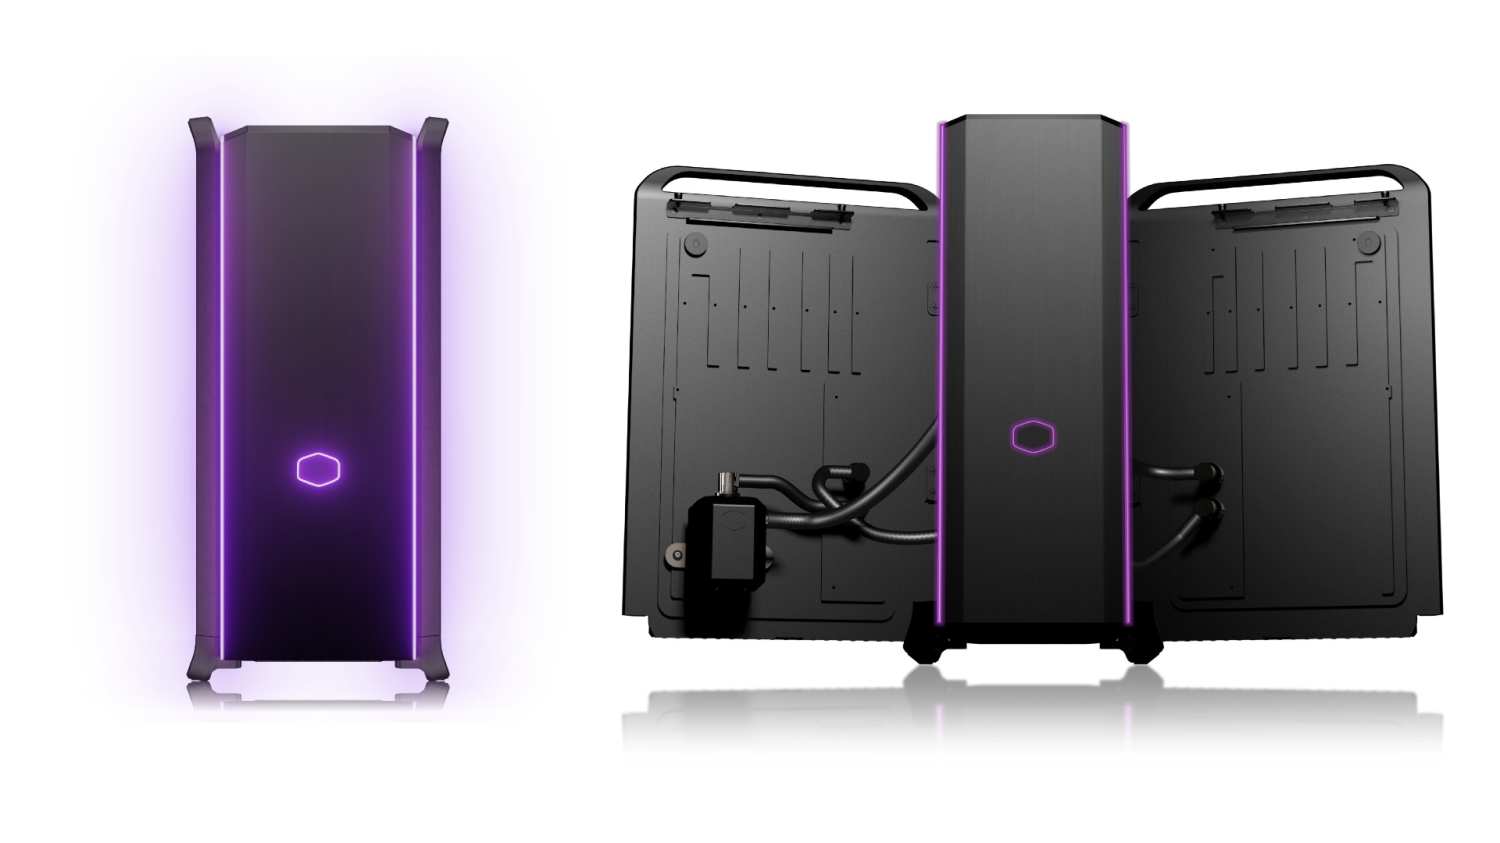 TweakTown Enlarged Image - Cooler Master's Cooling X complete desktop PC with liquid cooling for the CPU and GPU in the side panels, image credit: Cooler Master.